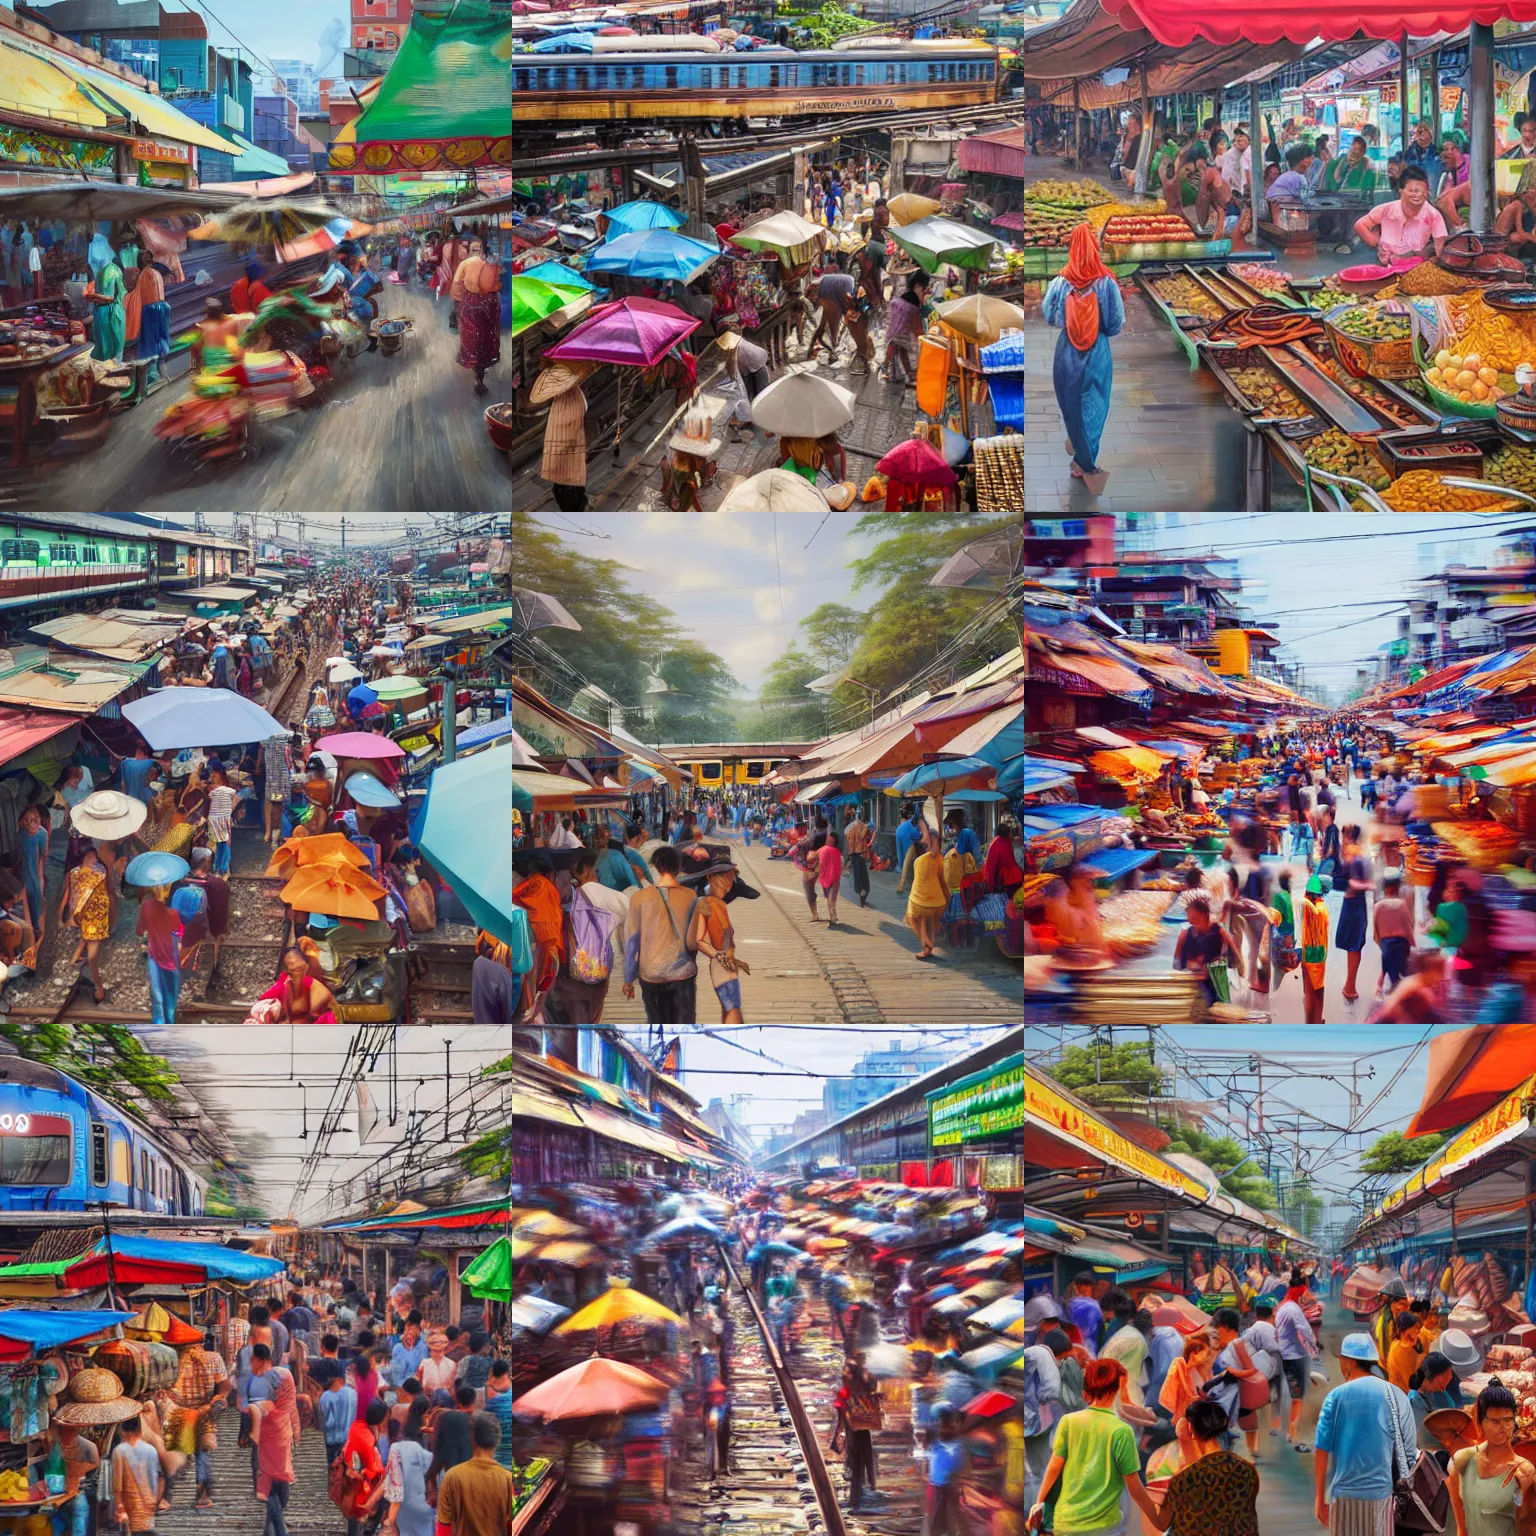 Prompt: focusing on a train approaching on train tracks through a busy street market, maeklong railway market, market stalls, a hyperrealistic painting by ryan yee, shutterstock contest winner, magical realism, cluttered, behance hd, photorealistic